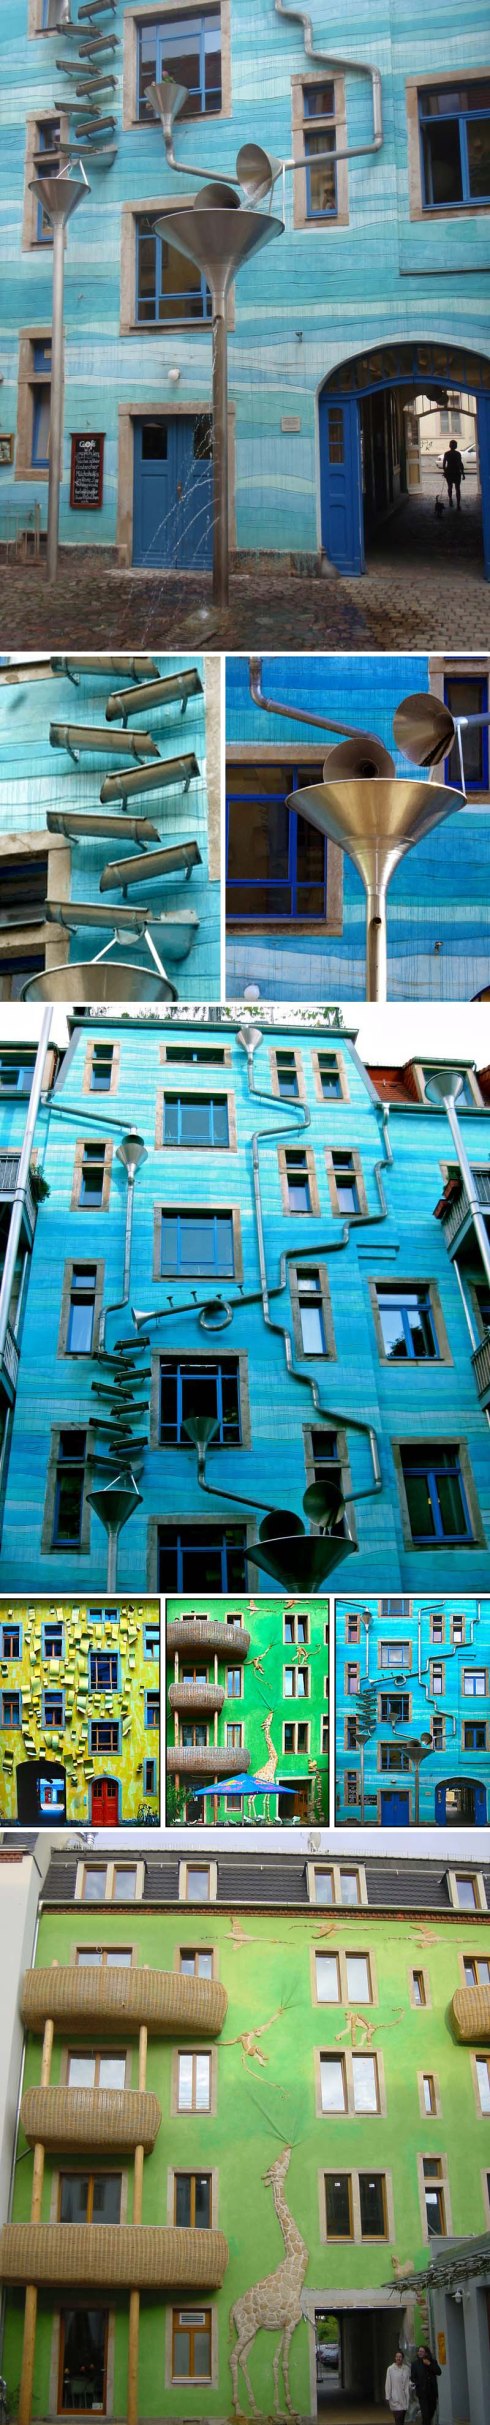 Kunsthof Passage, musical rain facade, gutters and funnels as instruments, dresden, germany, fun building